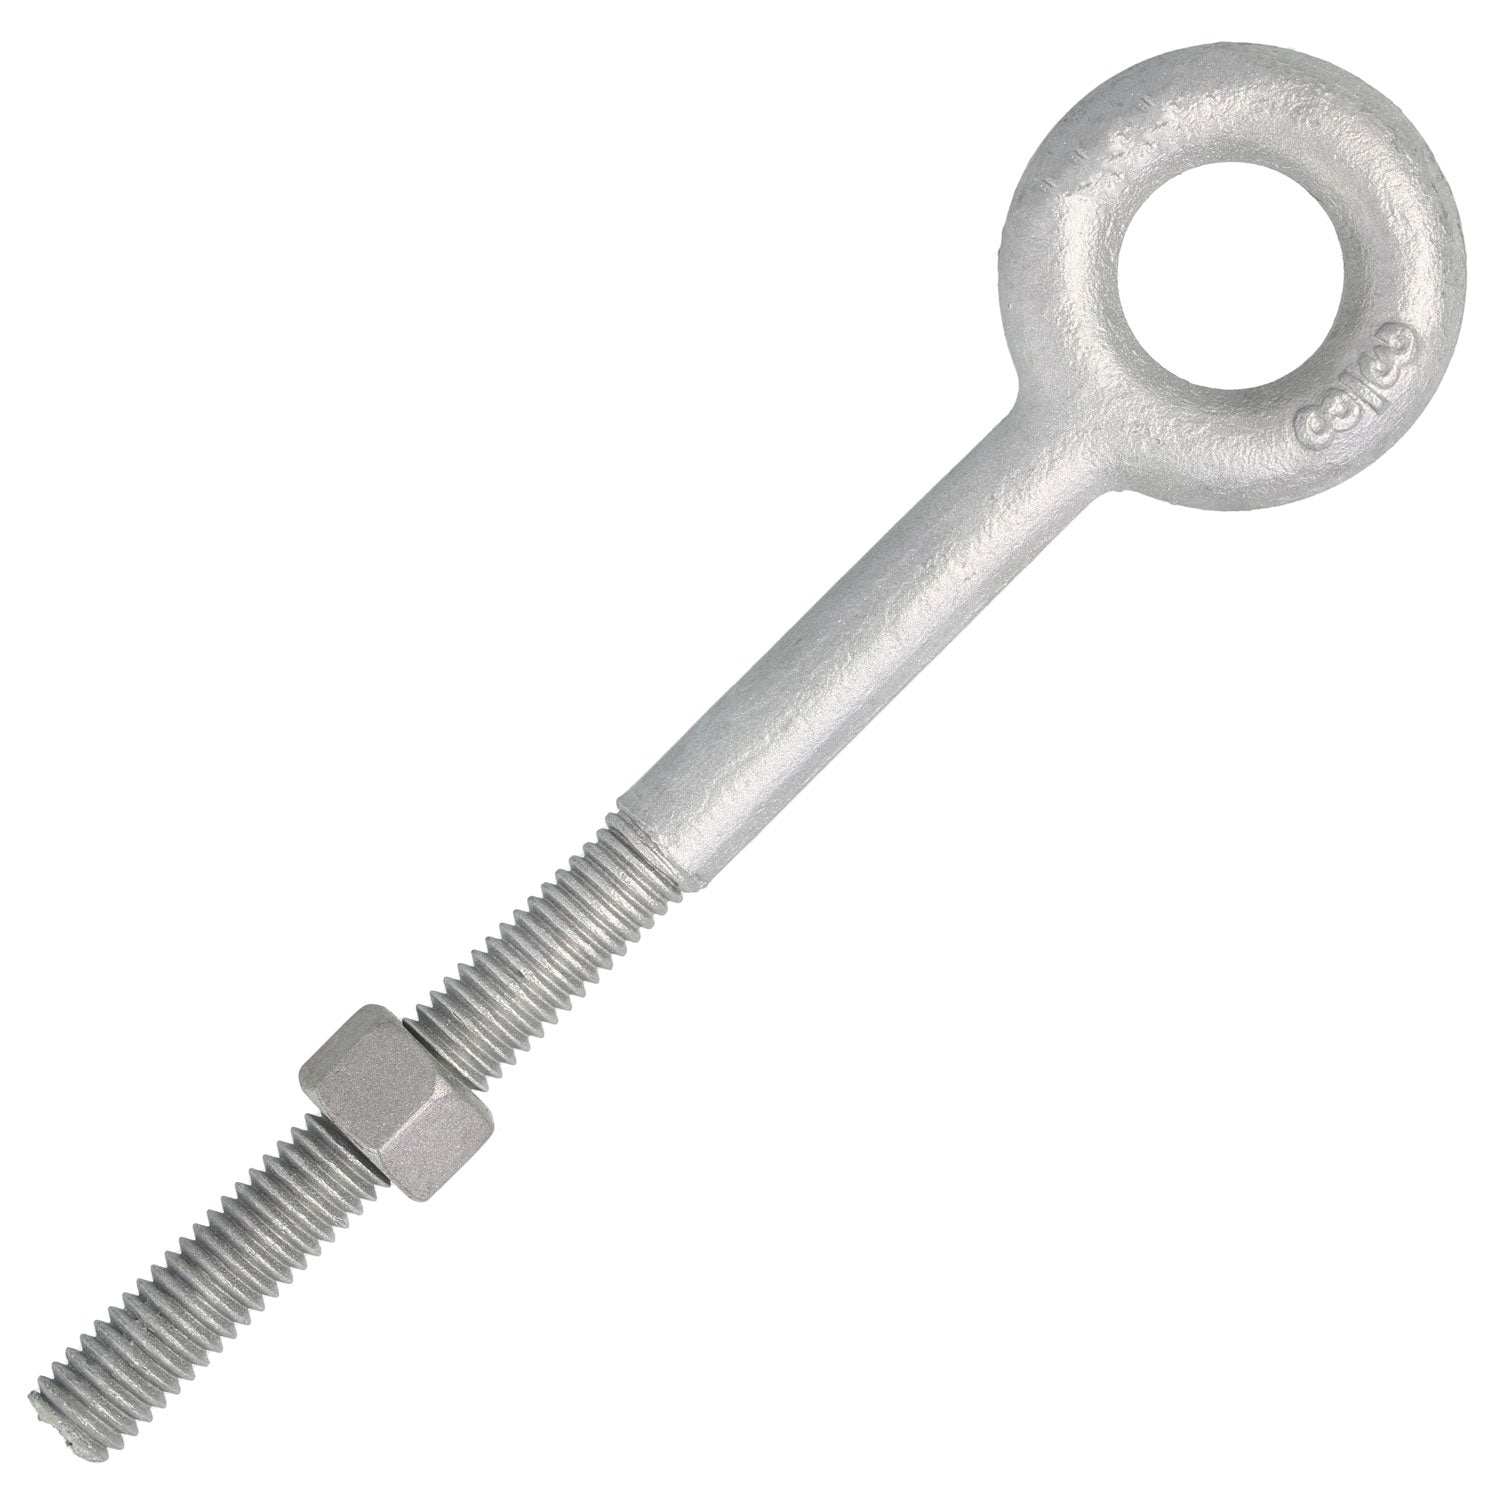 Pack of 10 Lyn-Tron 0.75 Length, Clear Iridite Female Aluminum 0.5 OD 1/4-20 Screw Size